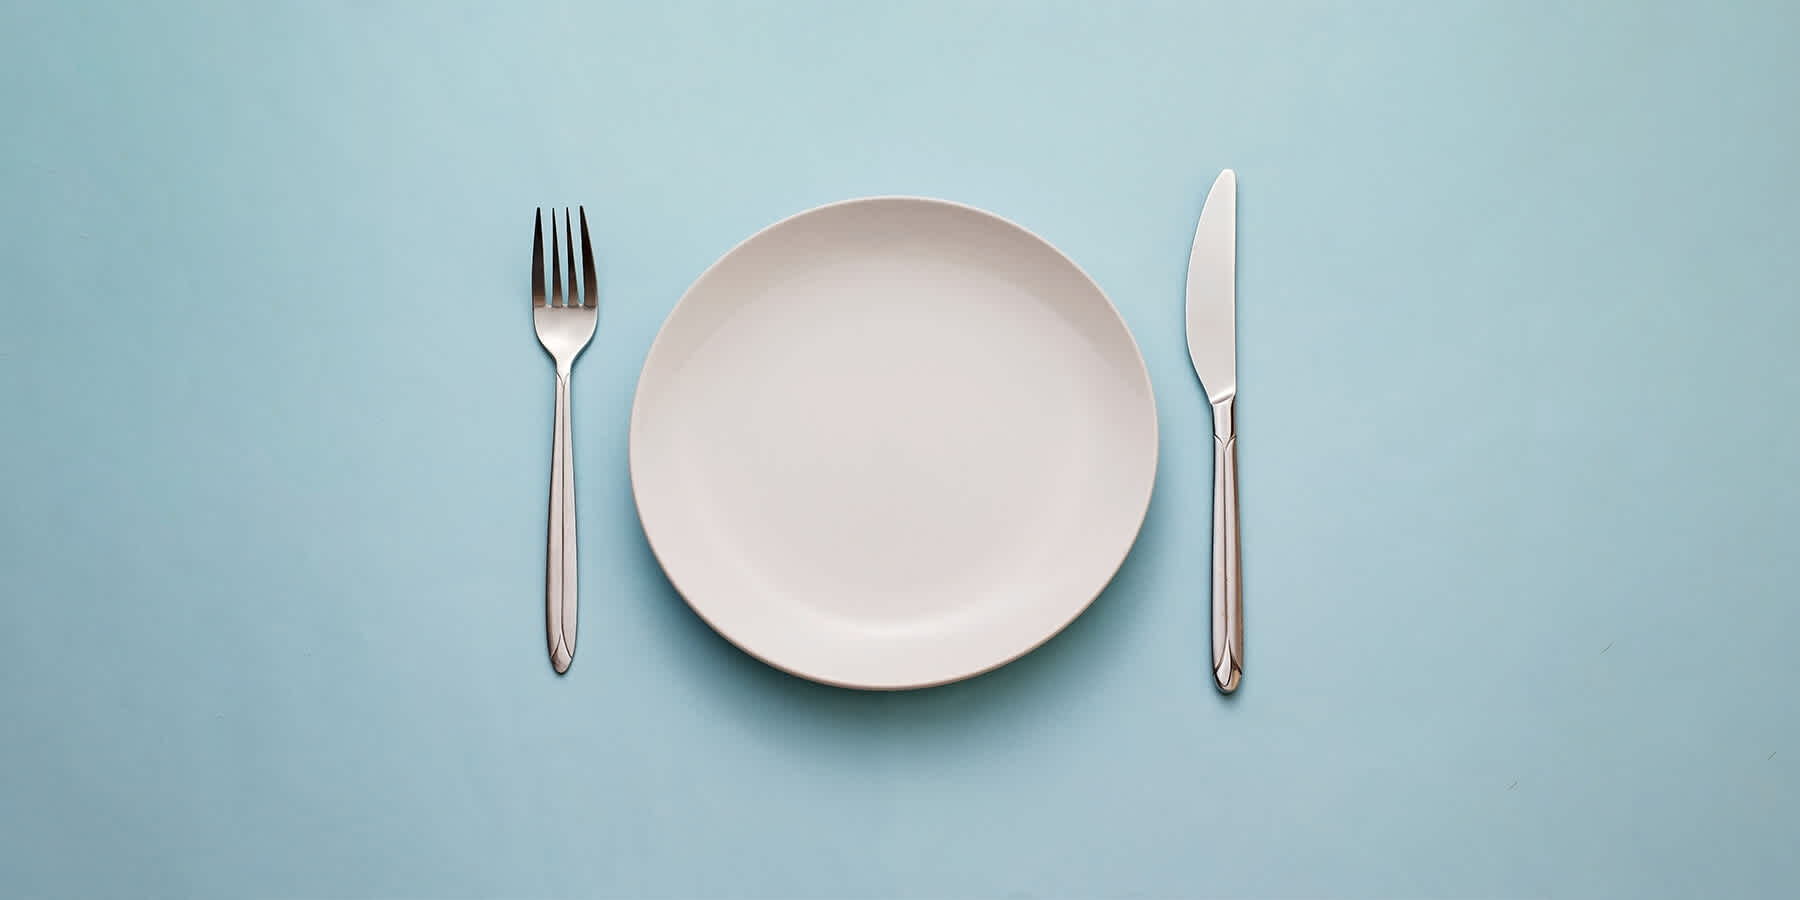 Empty plate with fork and knife to represent fasting before A1c test